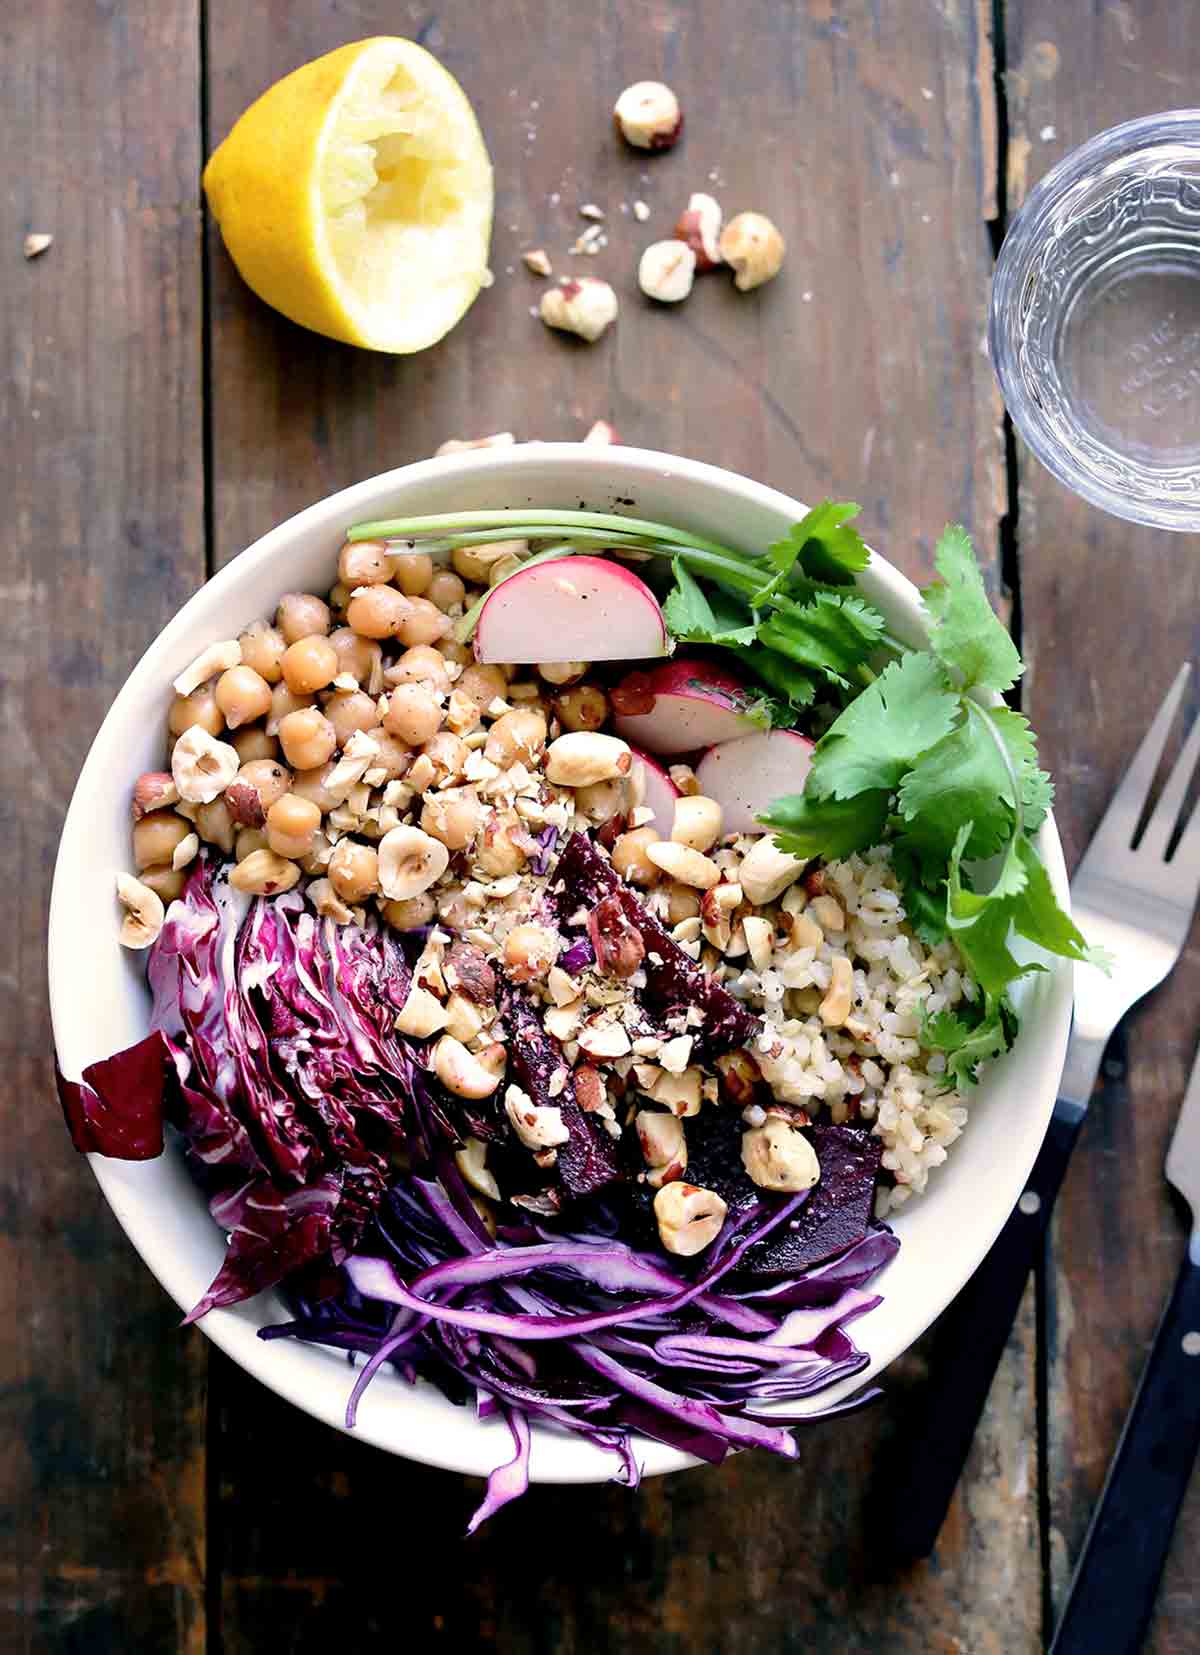 A veggie rice bowl filled with cabbage, rice, chickpeas, hazelnuts, and cilantro on a wooden table.